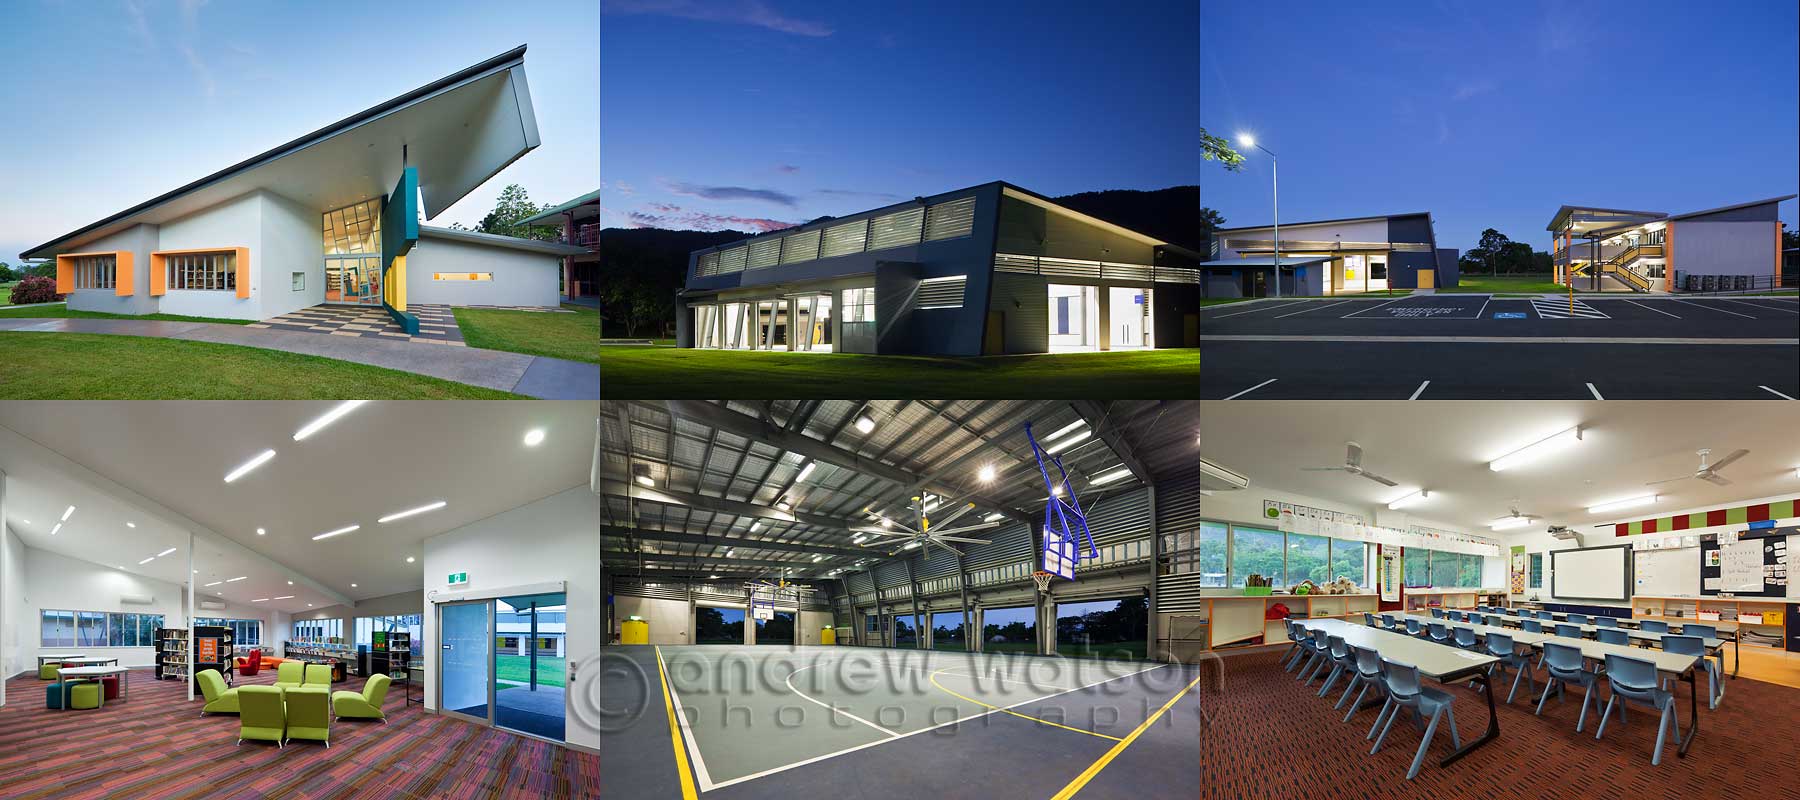 Architecture photography - St Therese's School, Cairns